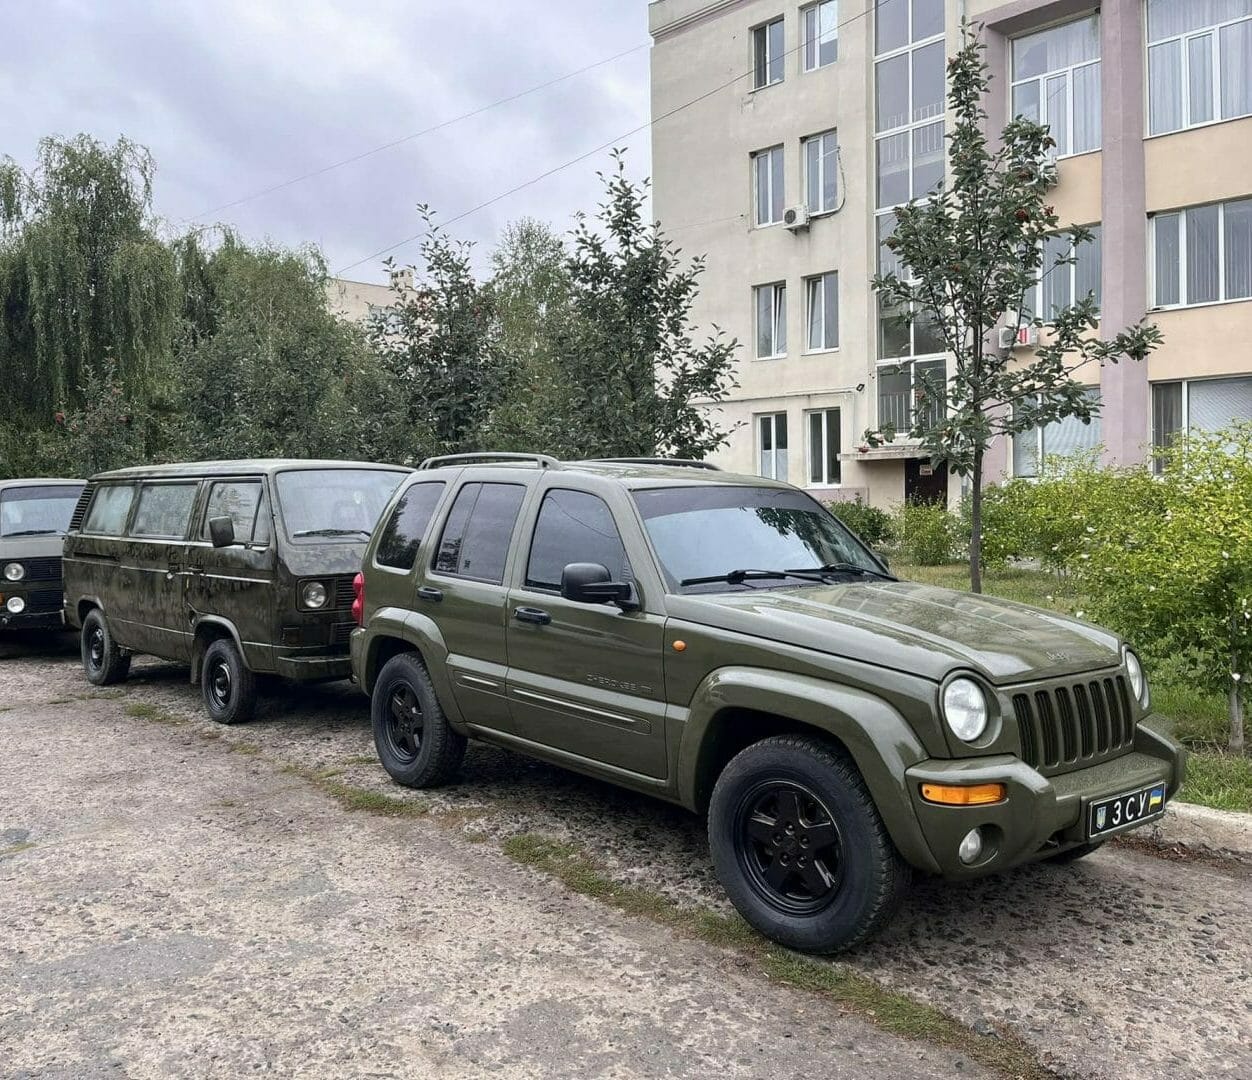 Cars - Victory! #Balta_community_We_believe_in_the_Armed_Forces_of_Ukraine